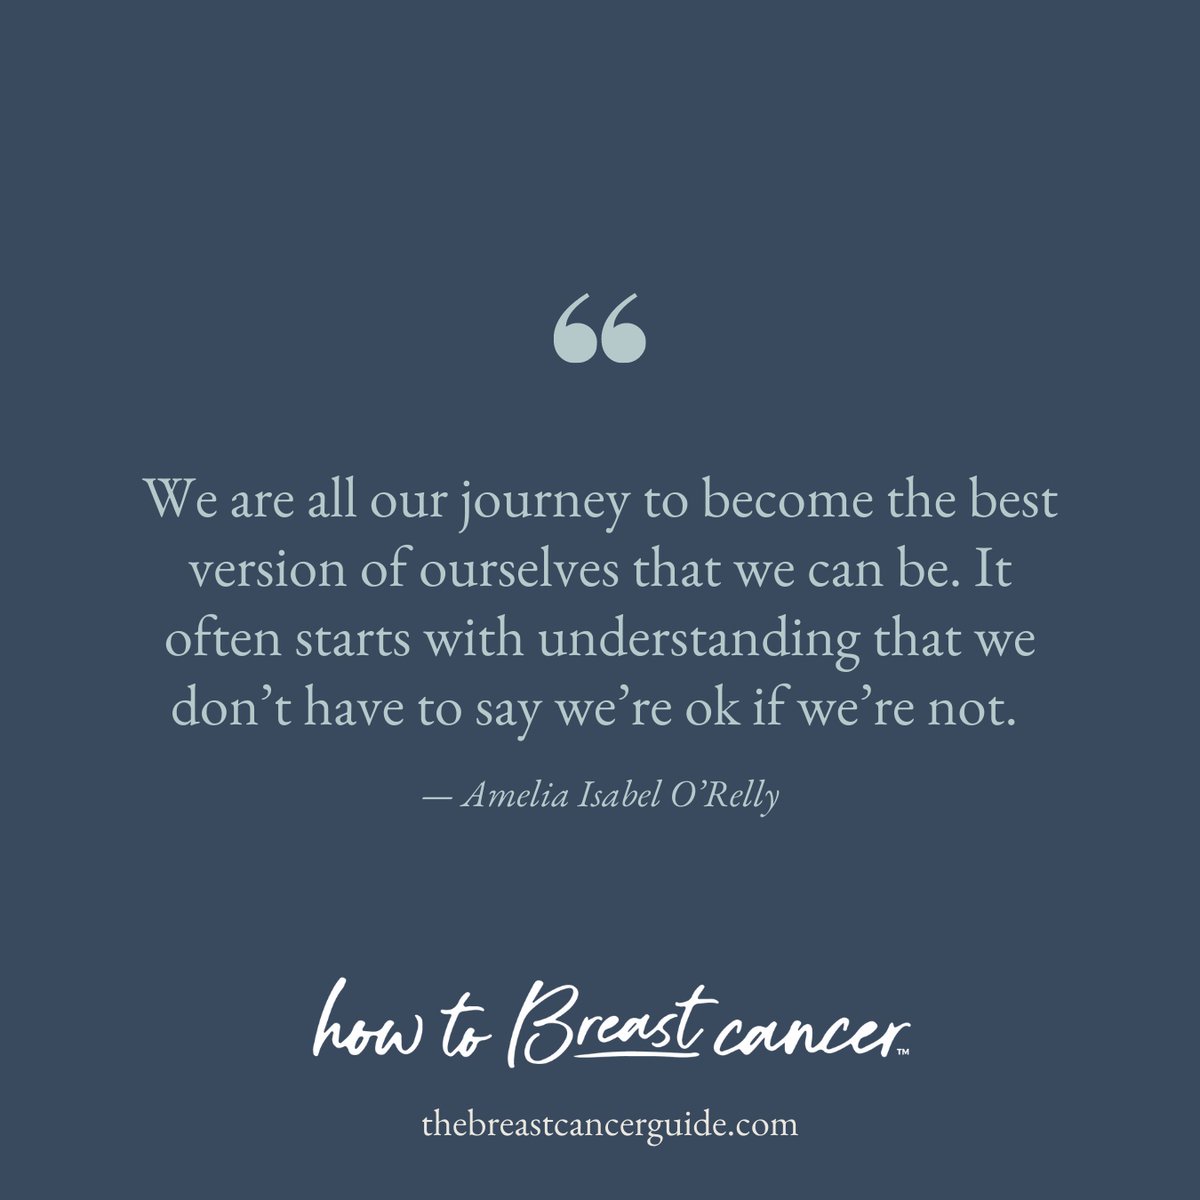 And that’s ok because we are all on our own journey. Taking care of your mental health is just as important as your physical health. 

bit.ly/h2bcmind
.
#breastcancerawareness #breastcancercommunity #breastcancerpatient #cancerresource #mbc #metastaticbreastcancer